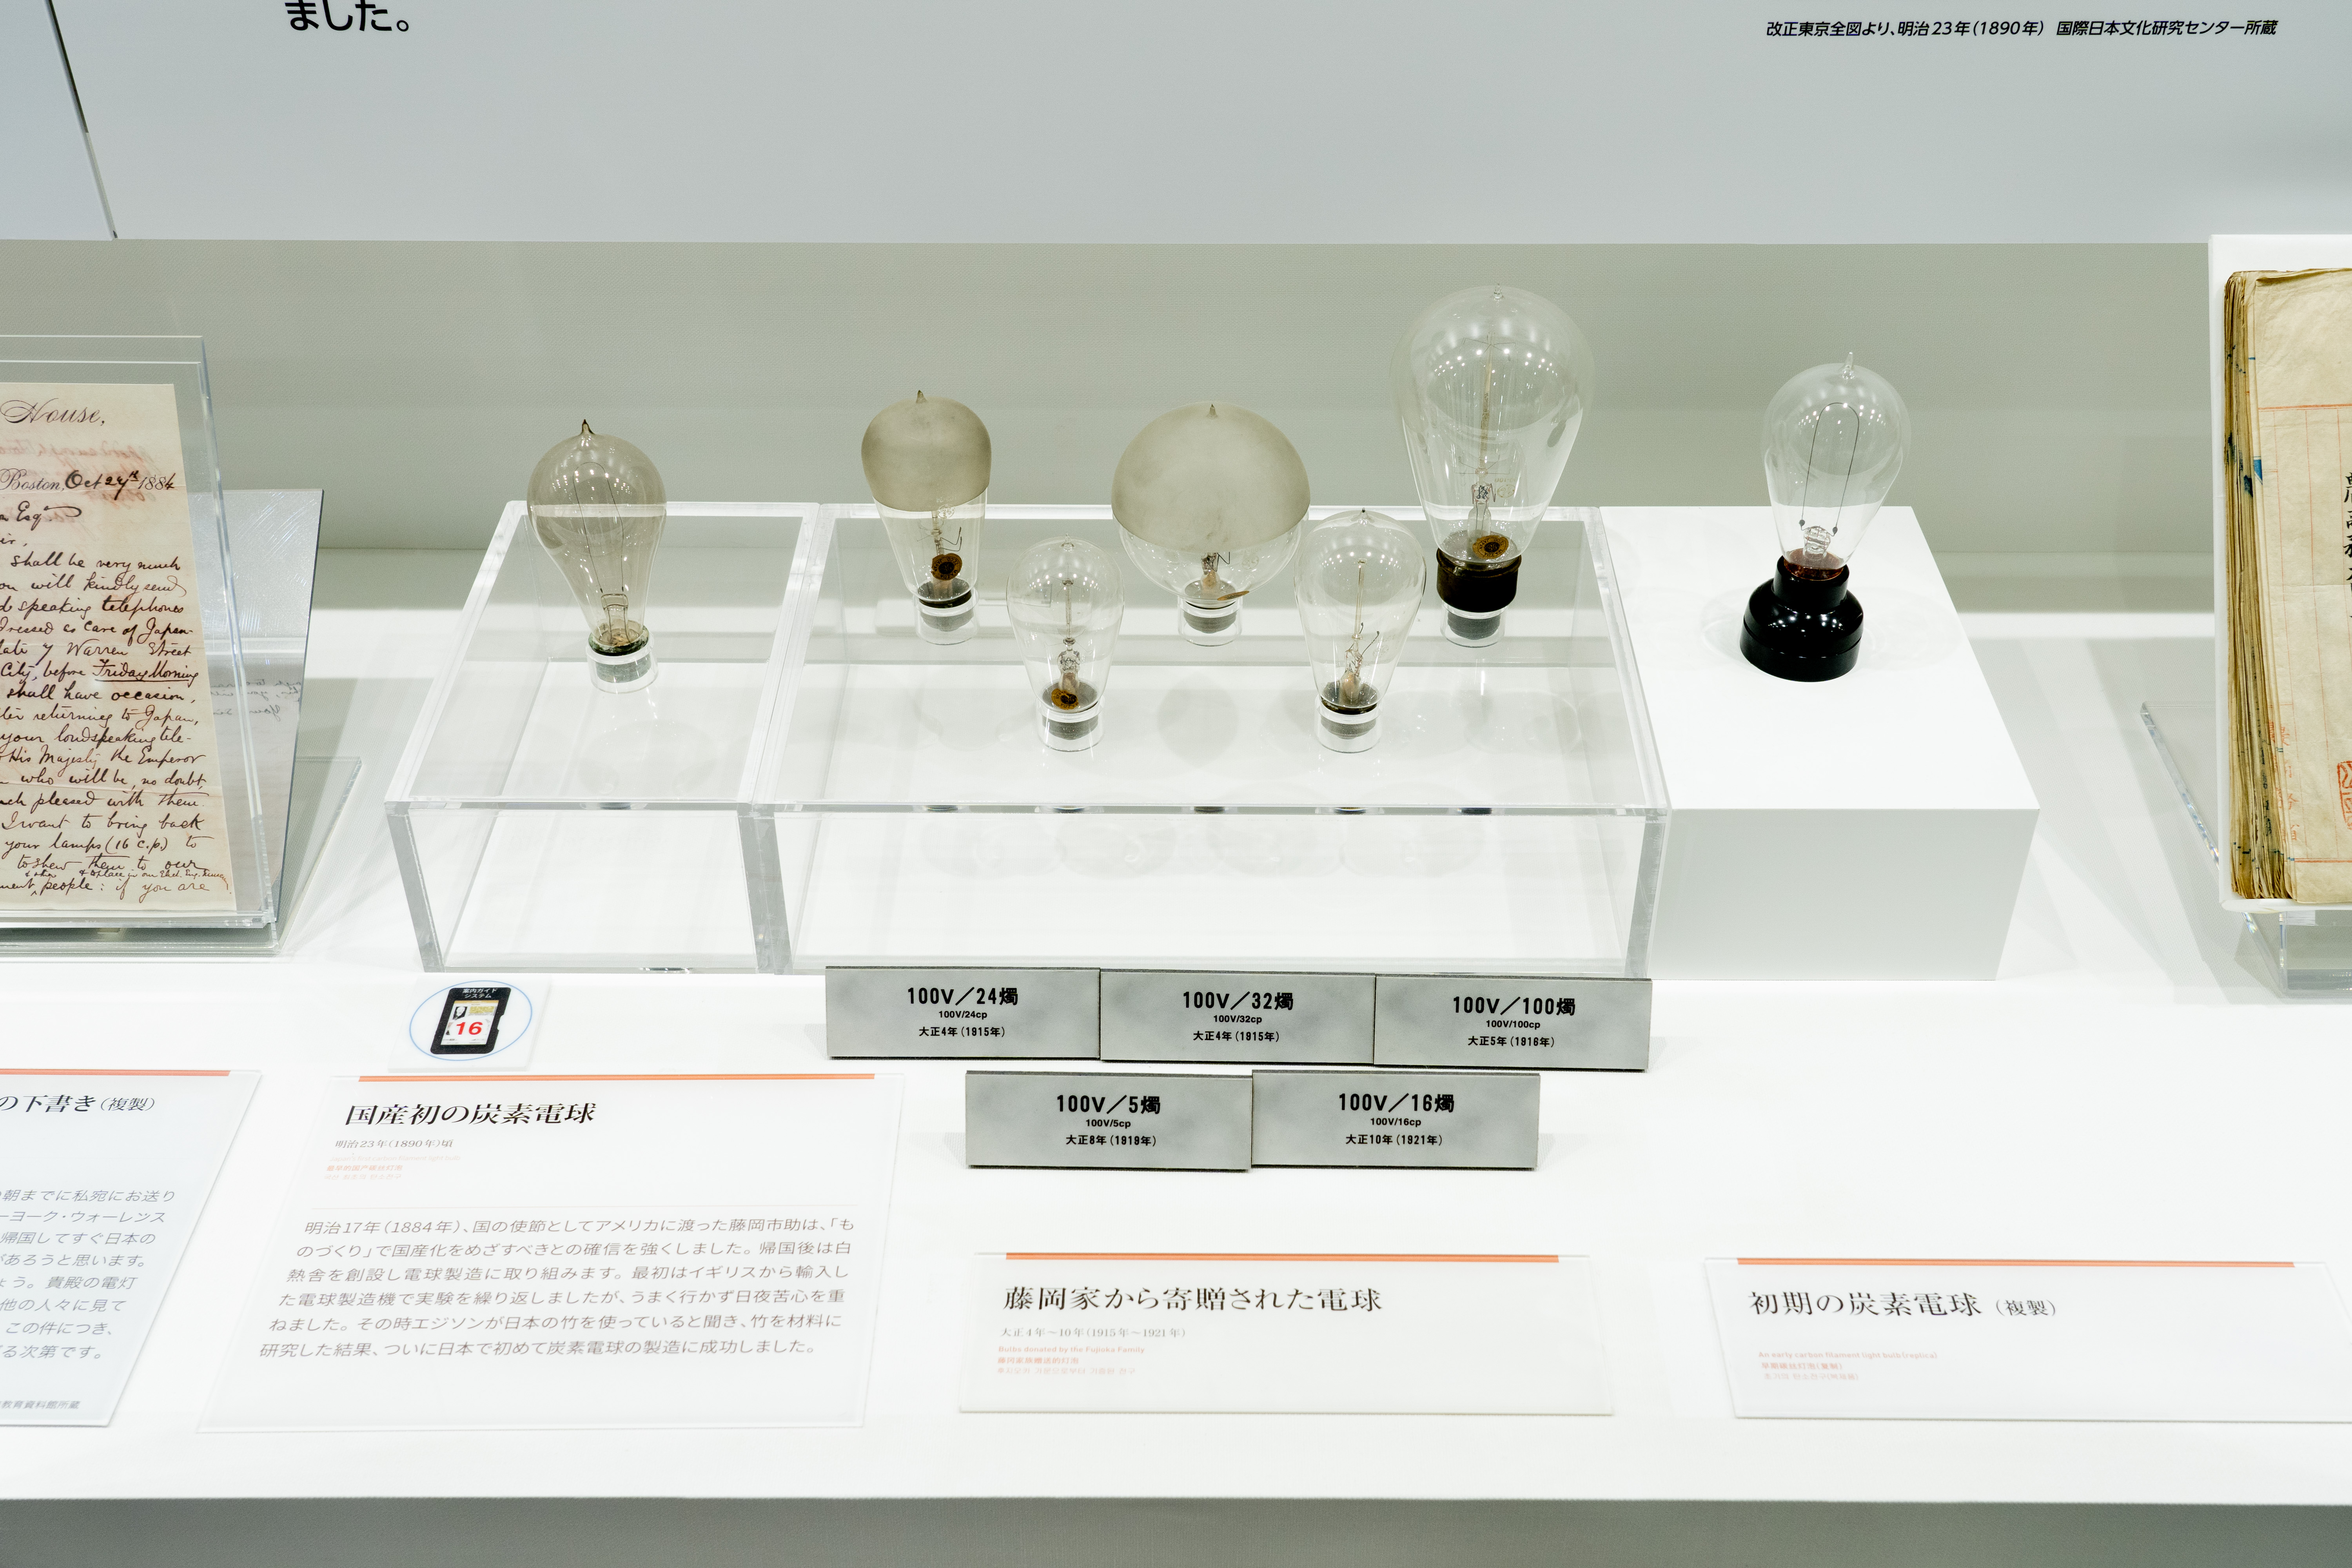 Incandescent light bulbs in the Early Meiji Period